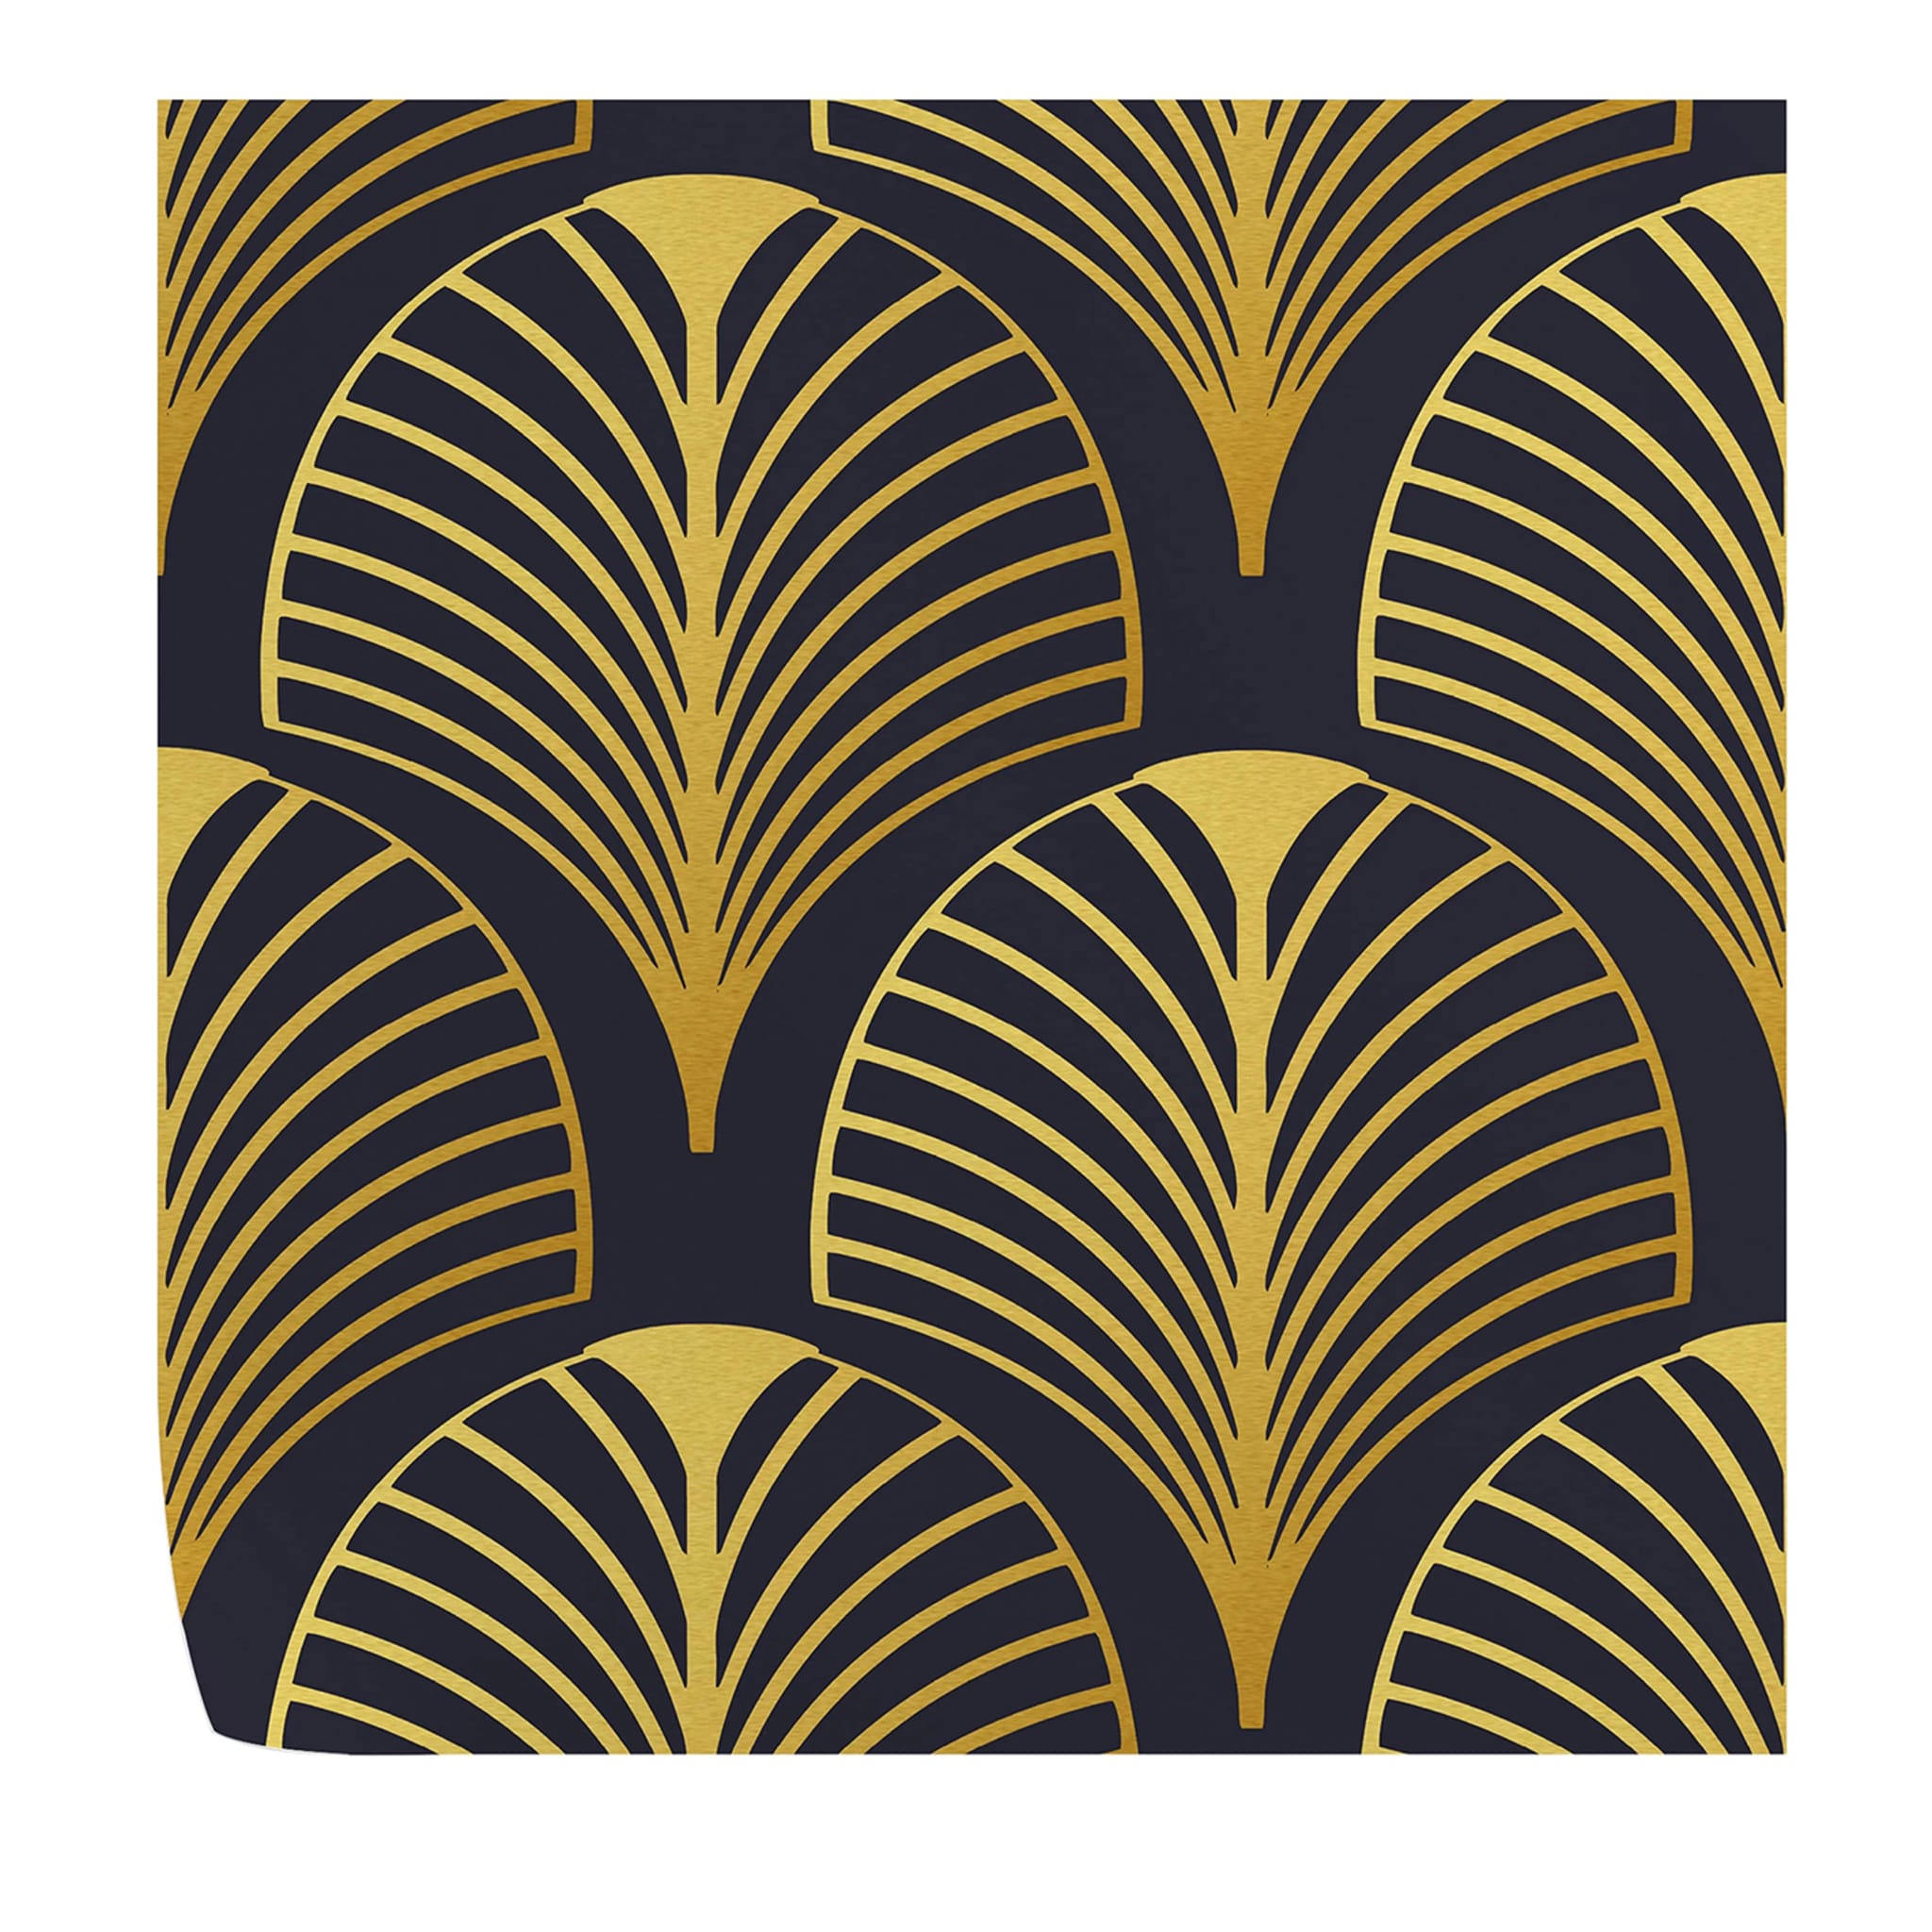 Art Deco Wallpaper in Vintage Style - Main view